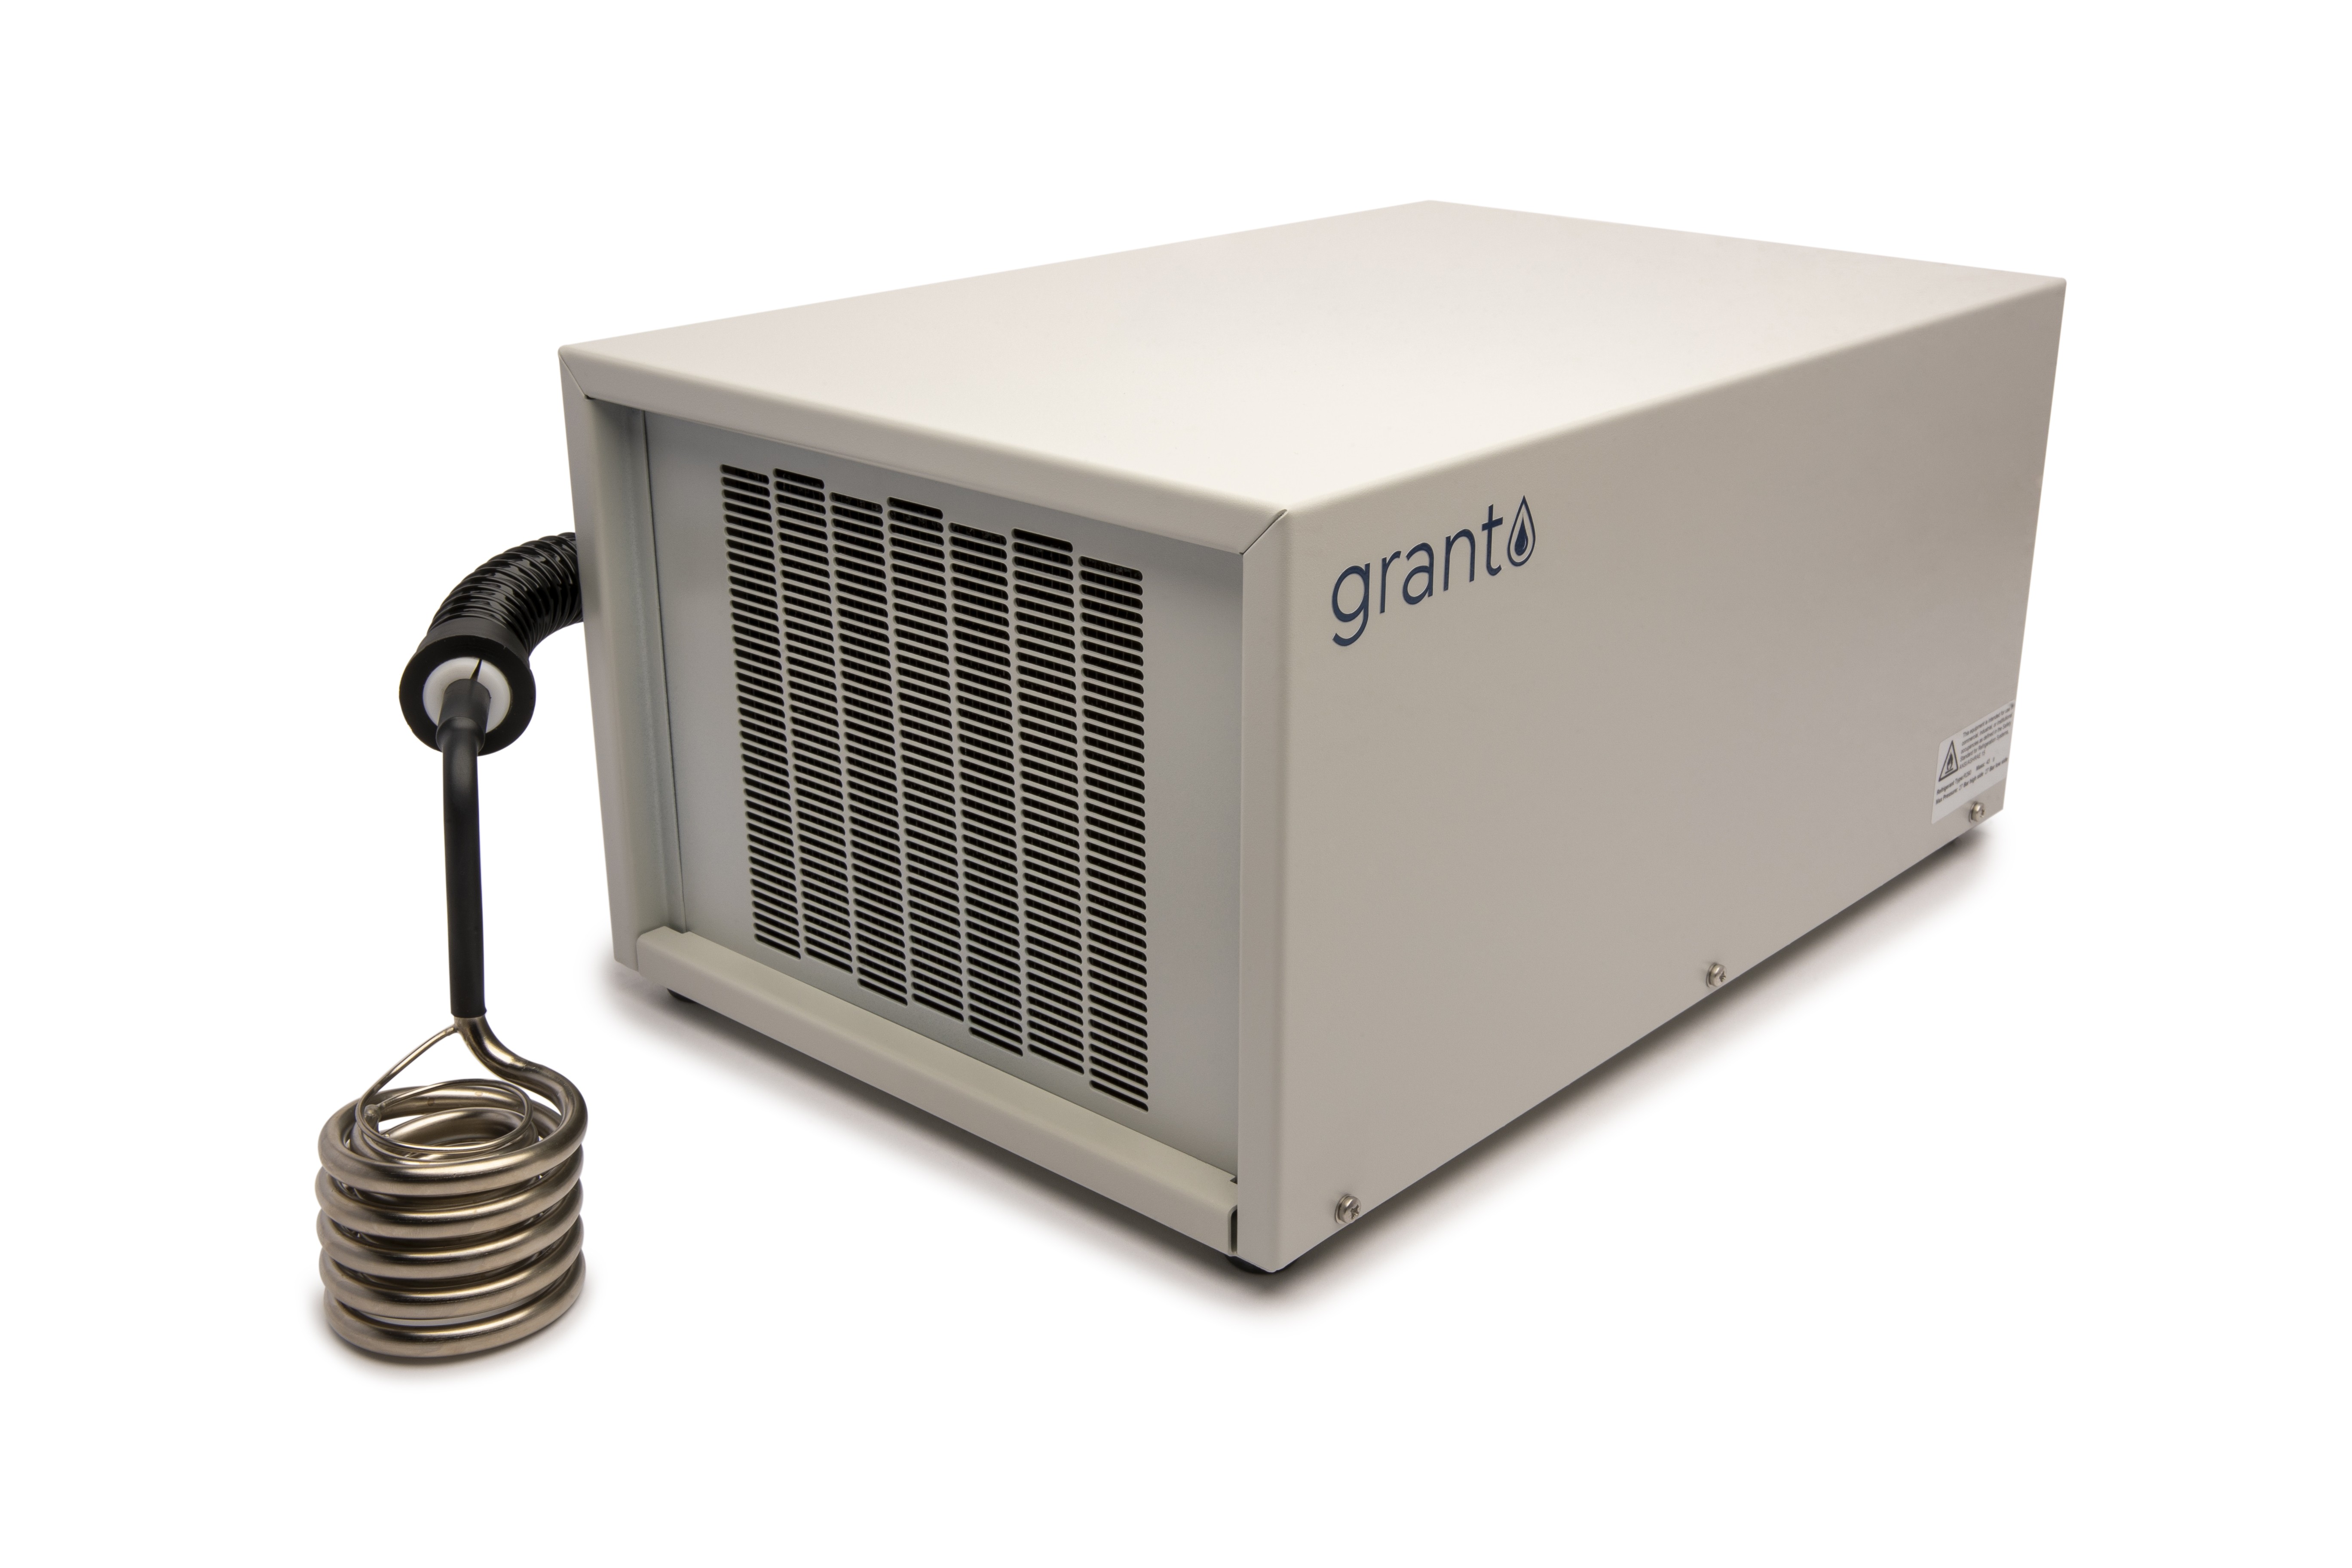 C1GR - Grant Instruments CG Refrigerated Immersion Coolers